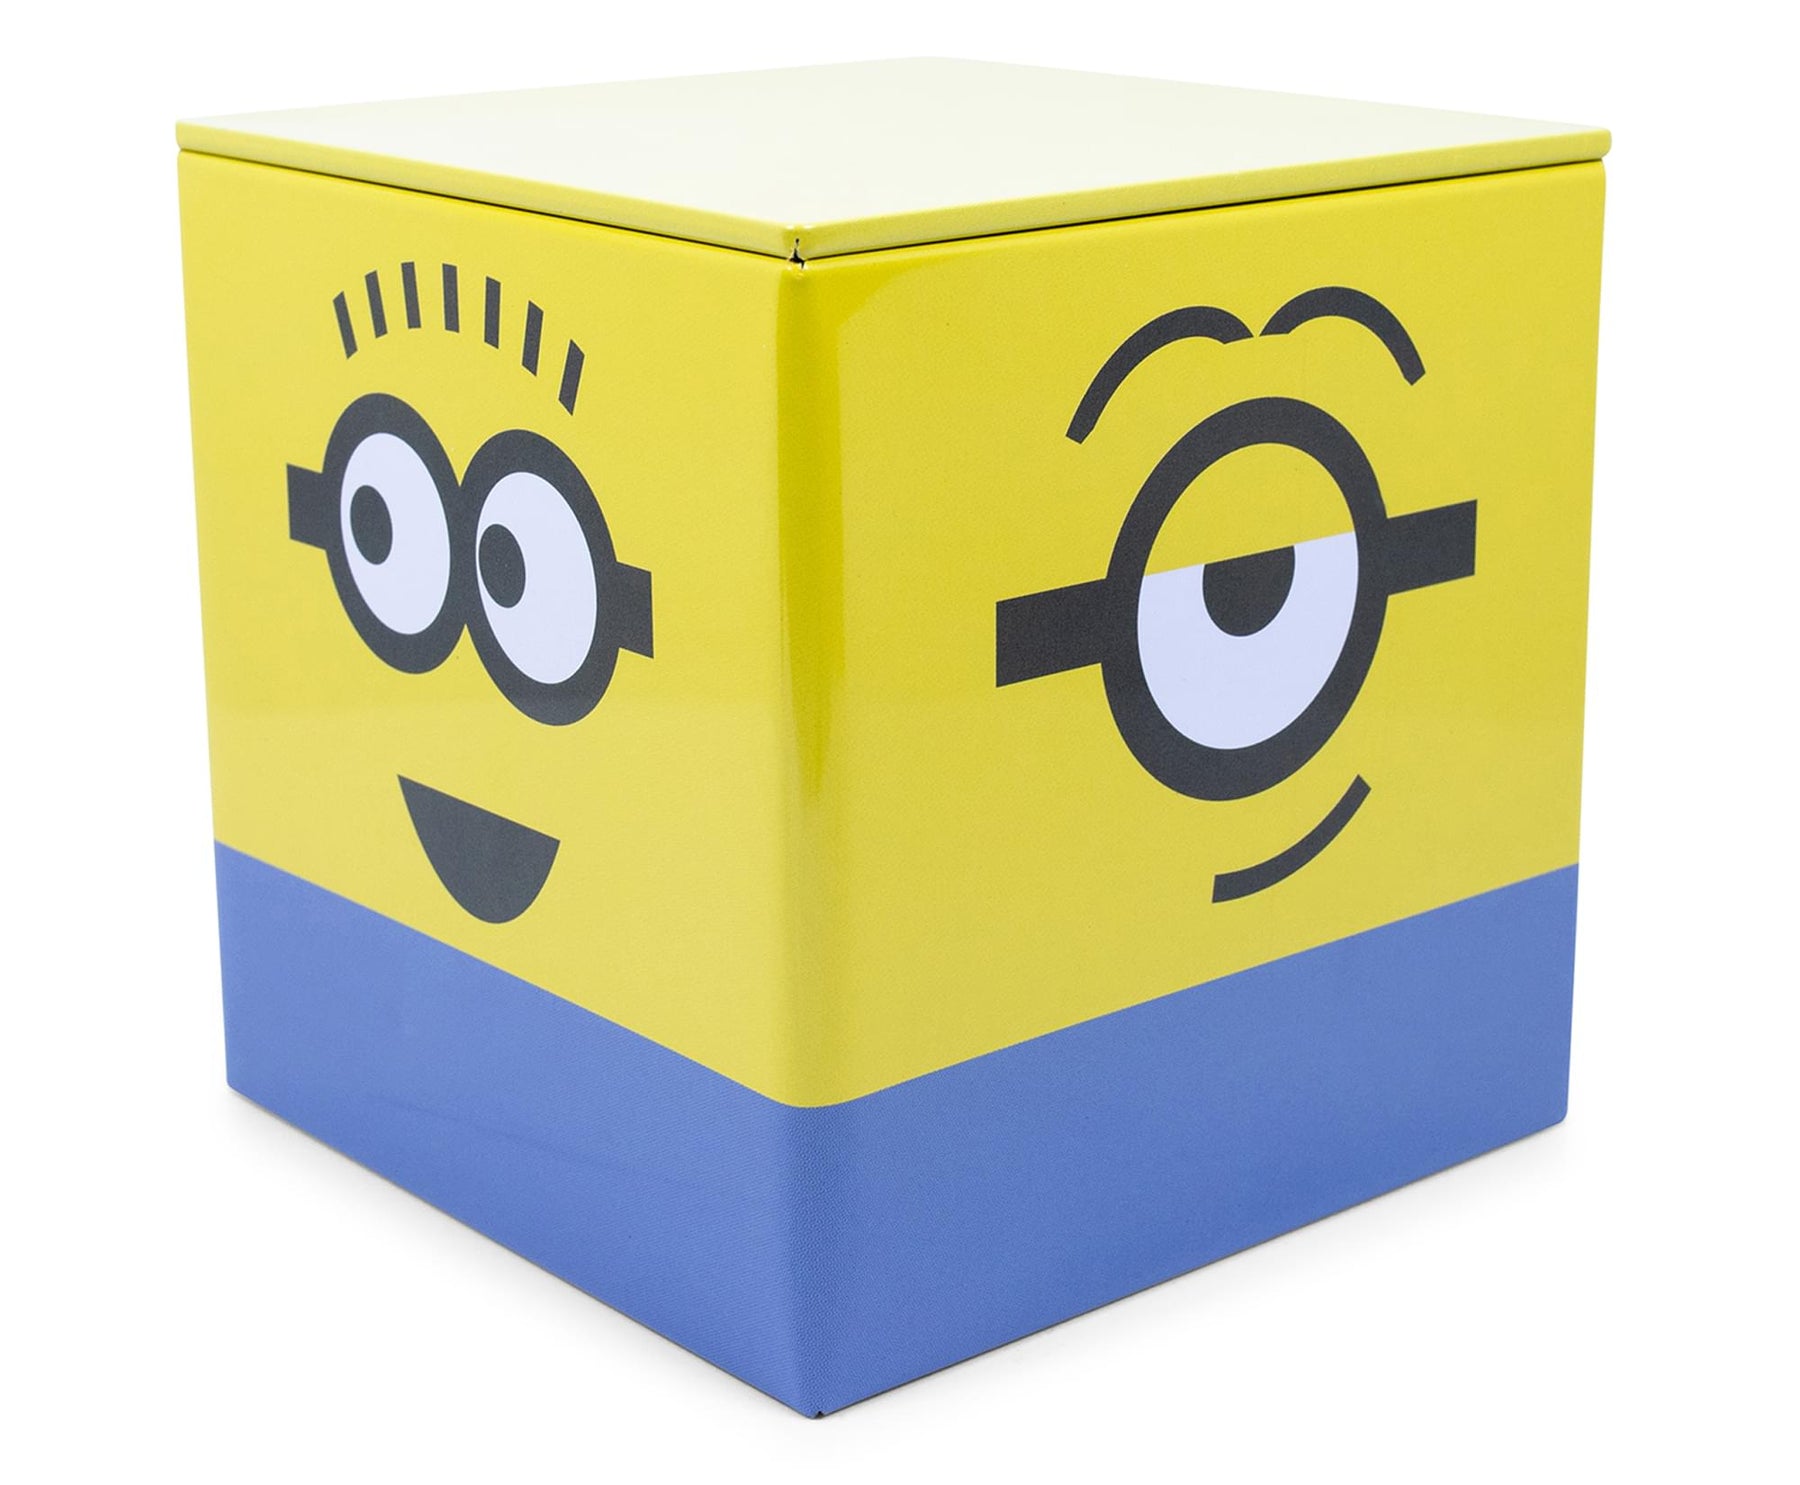 Despicable Me Minion Lunch Box New Tag Licensed Product